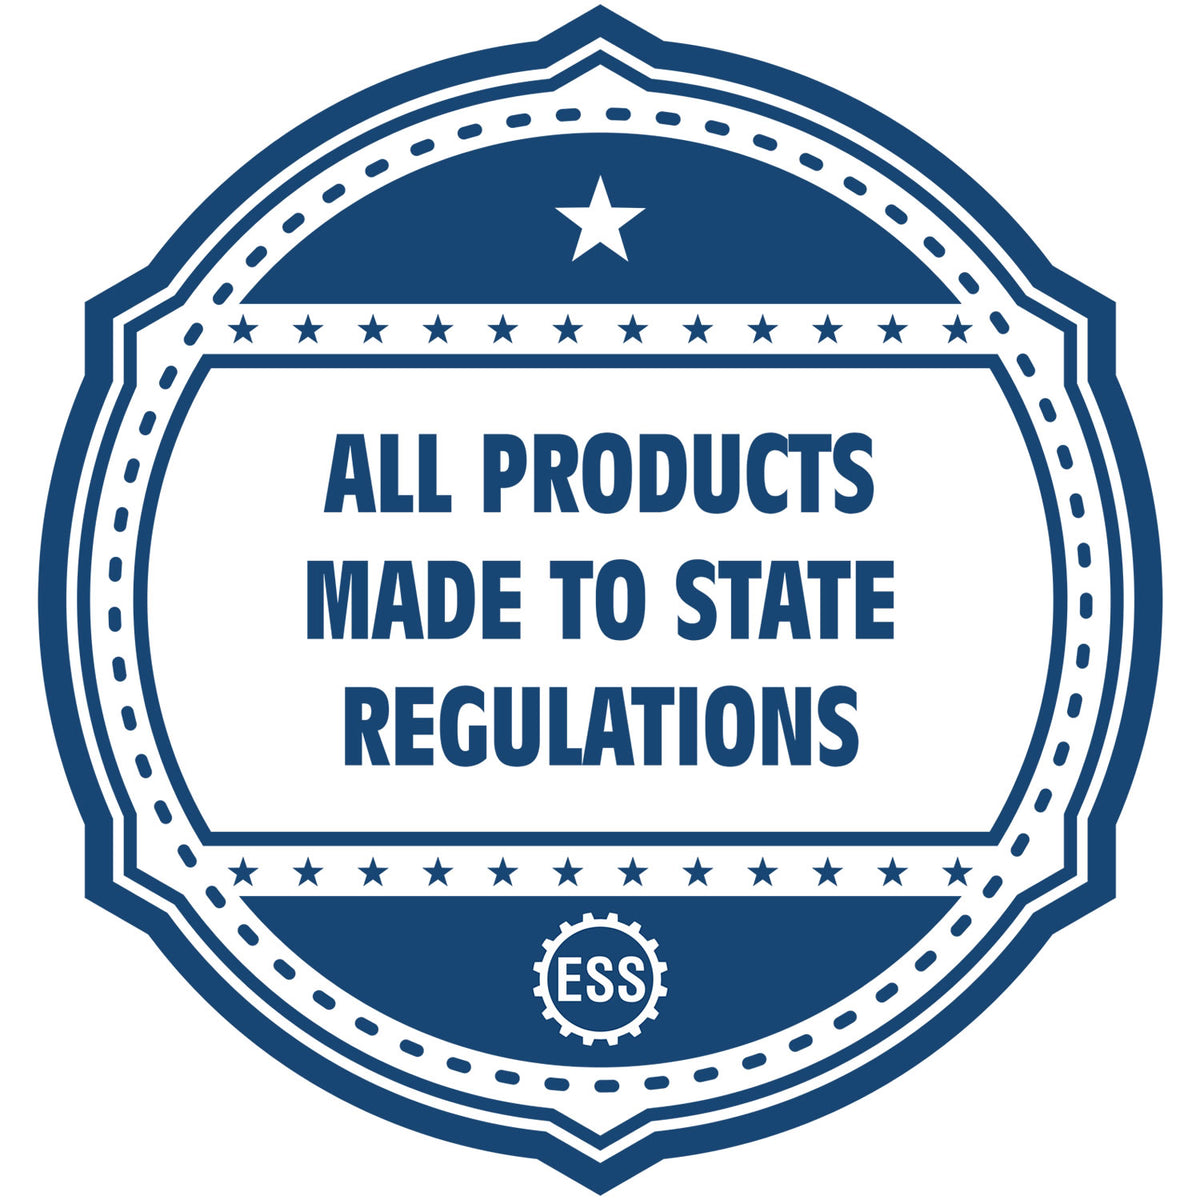 An icon or badge element for the Self-Inking State Seal Virginia Notary Stamp showing that this product is made in compliance with state regulations.